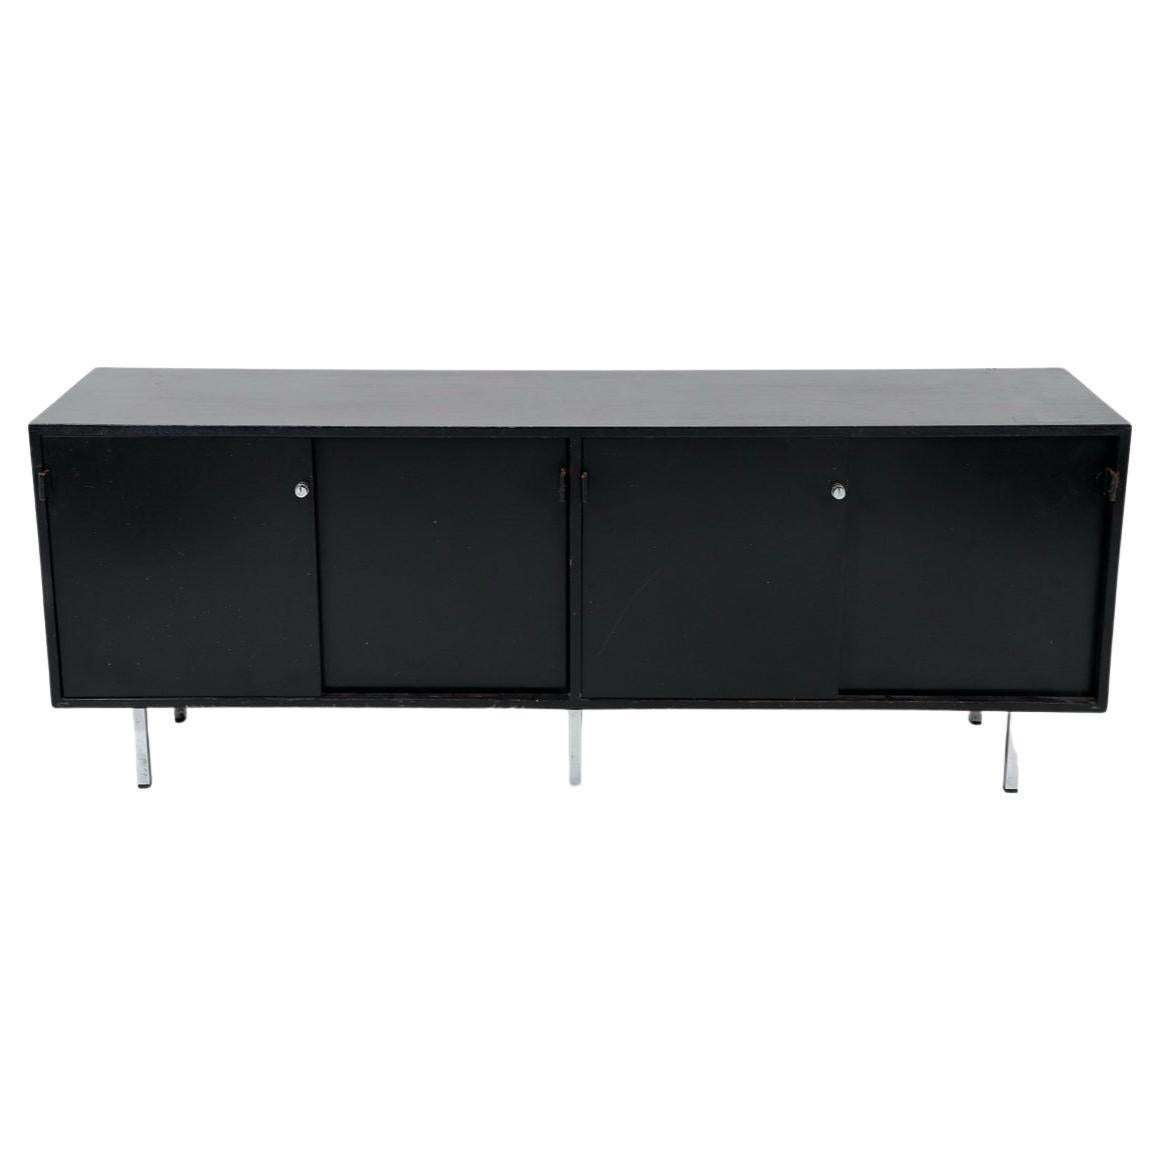 Mid century Black Lacquer Florence Knoll office Cabinet Credenza leather pulls